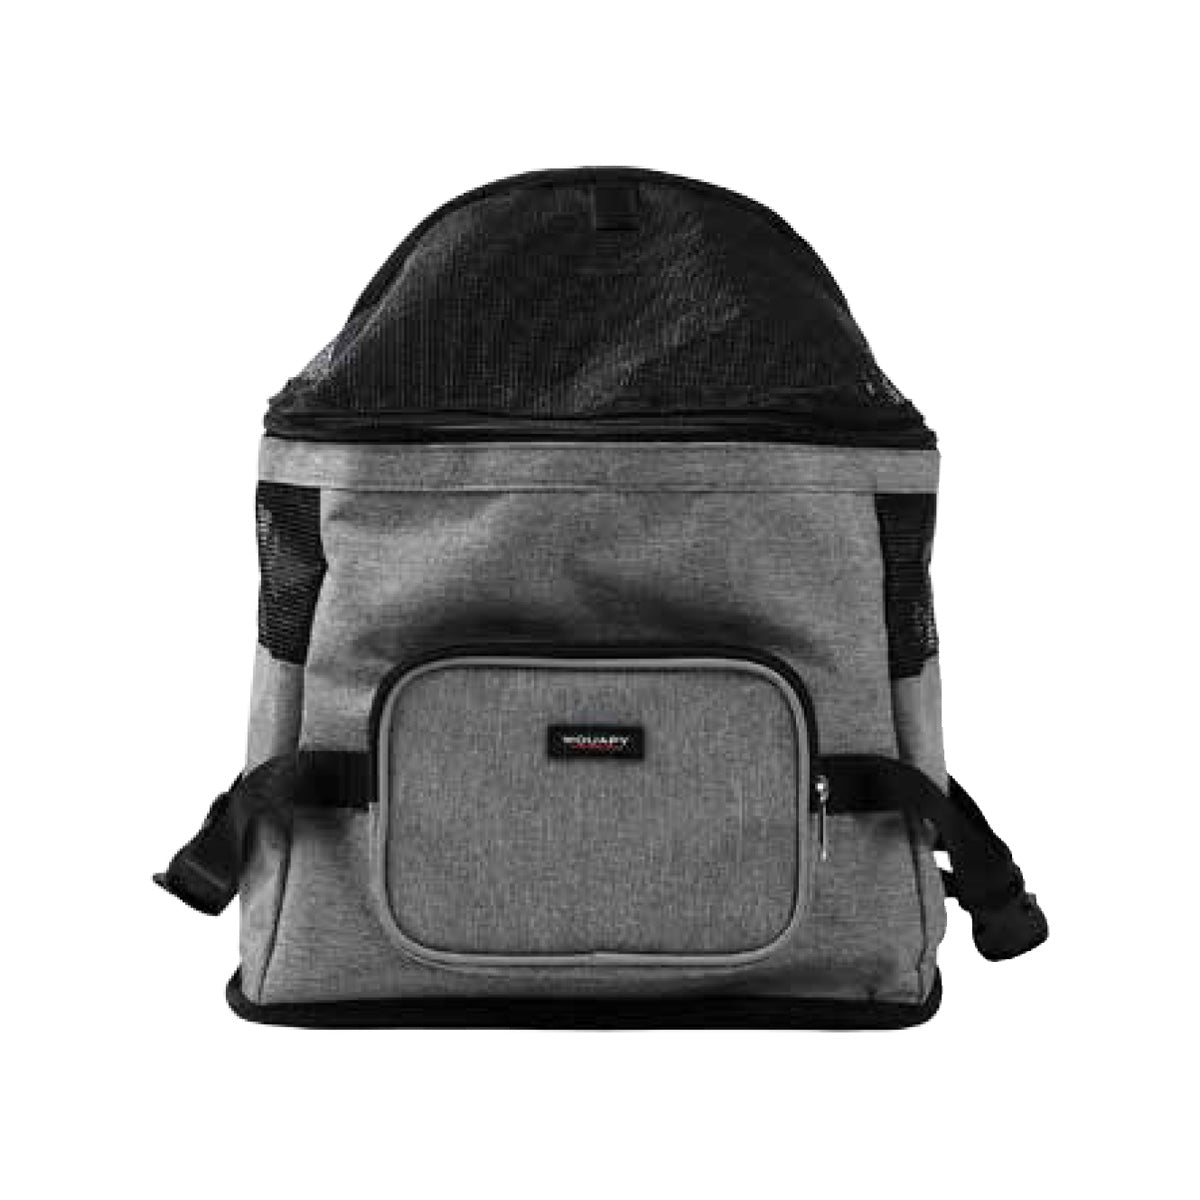 FRONT CARRIER WOUAPY 31X22X25CM GREY